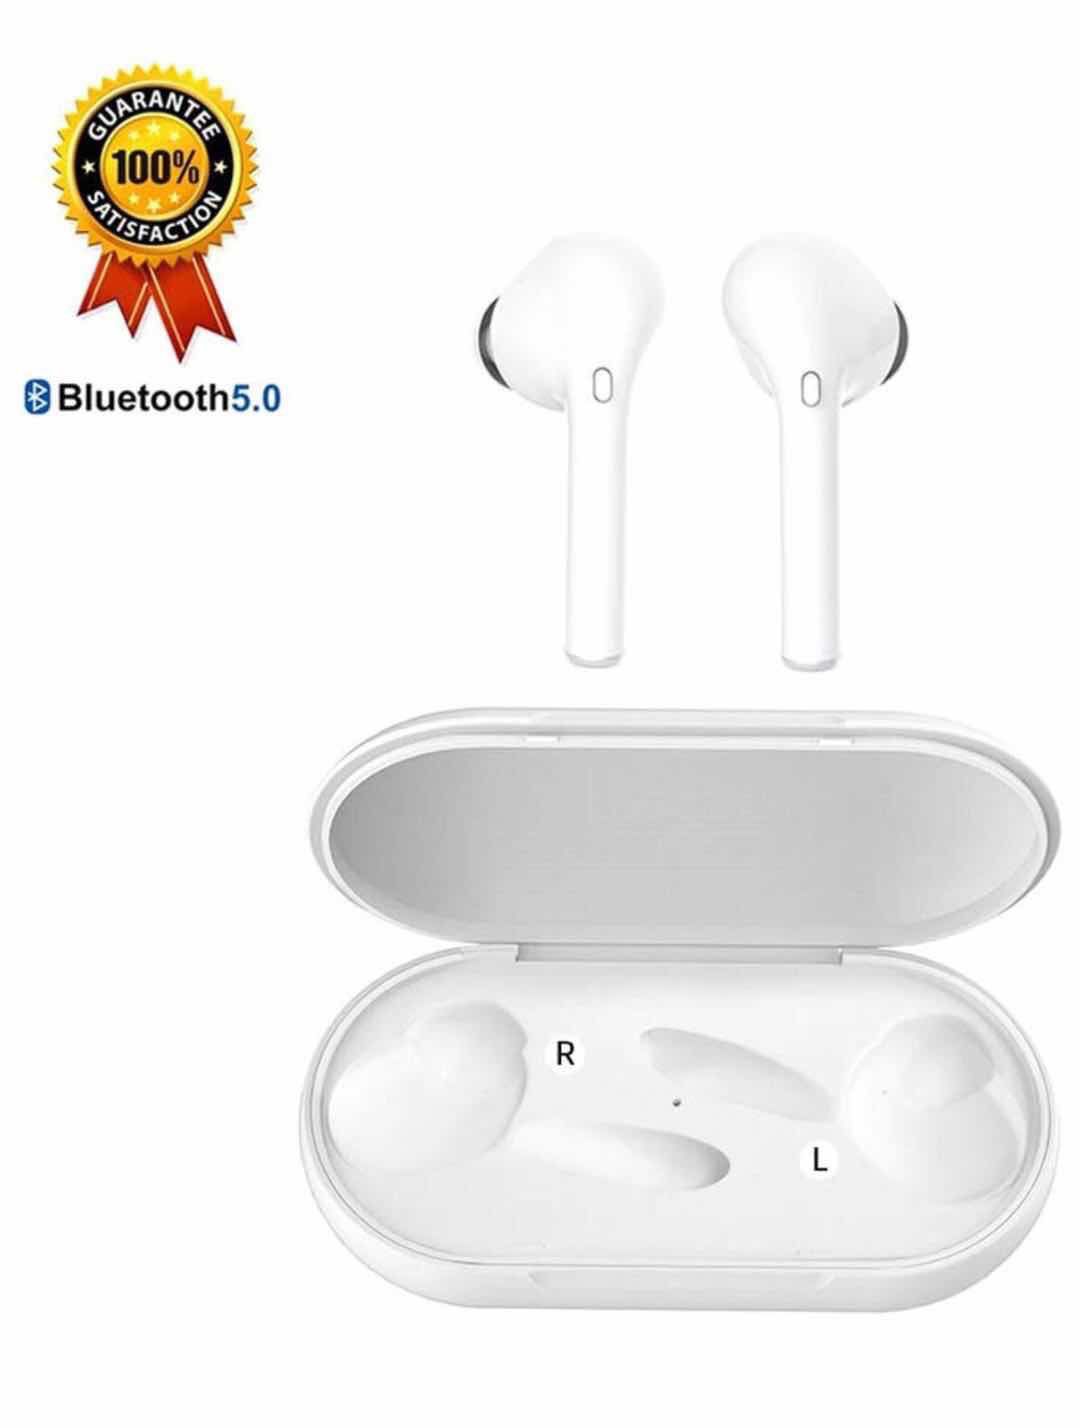 True Wireless Earbuds Bluetooth Earbuds Wireless Earbuds - Bluetooth 5.0 Mini in Ear TWS Earbuds with Charging Case,Noise Cancelling Earbuds,Earbuds